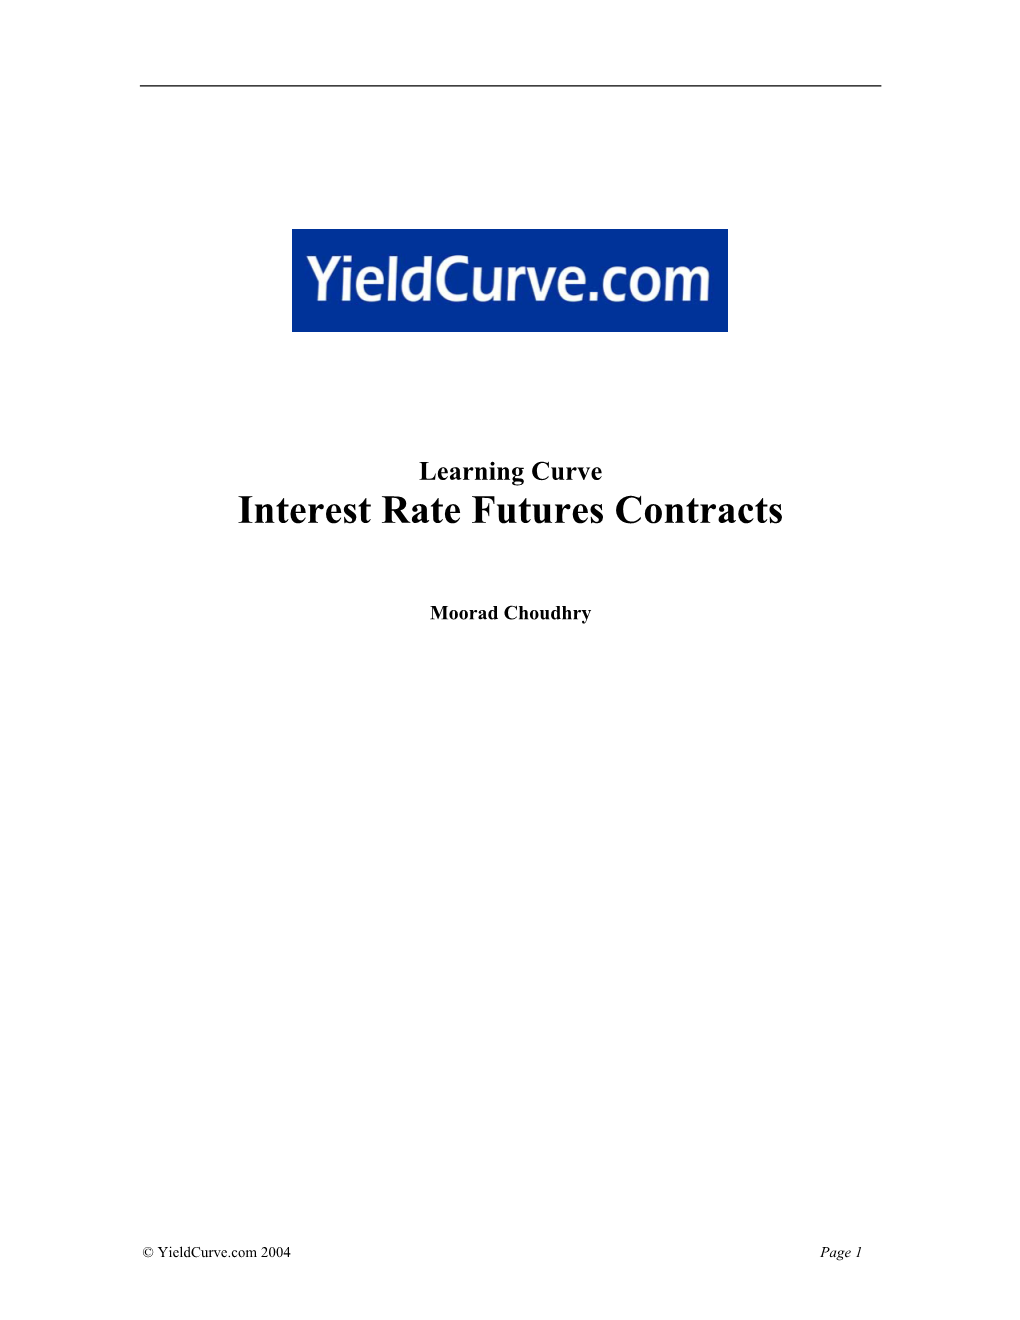 Fras and Interest Rate Futures